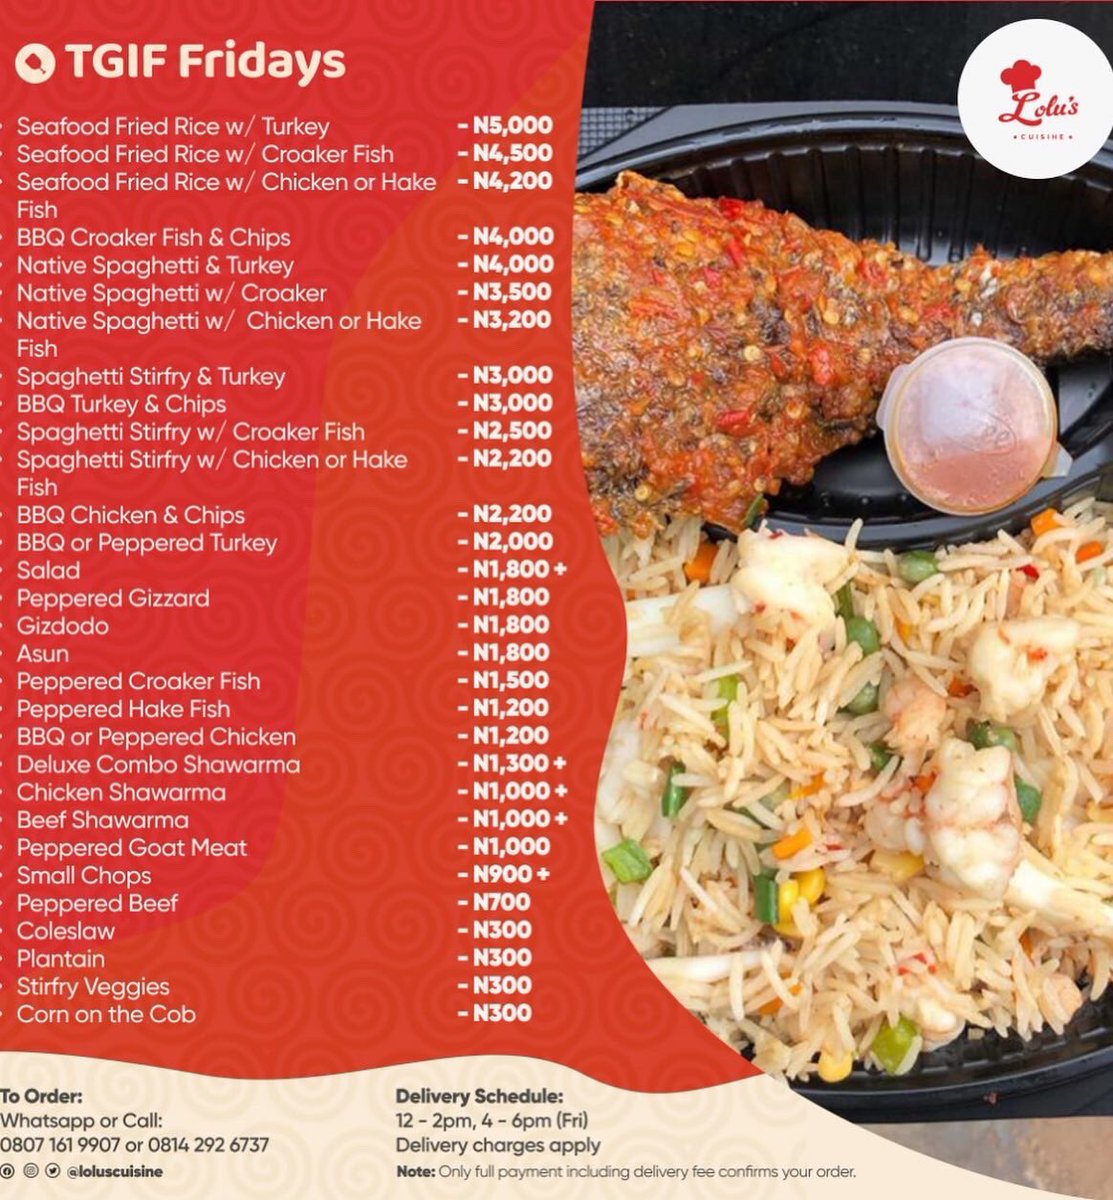 TGIF LUNCH MENU 

We’ve got a variety of Tasty BARBECUE options on the menu tomorrow🥰. THE BBQ croaker platter is absolutely amazing. 

Top notch seafoodrice/native spaghetti with various protein options is also available 🥰  . Free drinks on all complete meal💃🏻